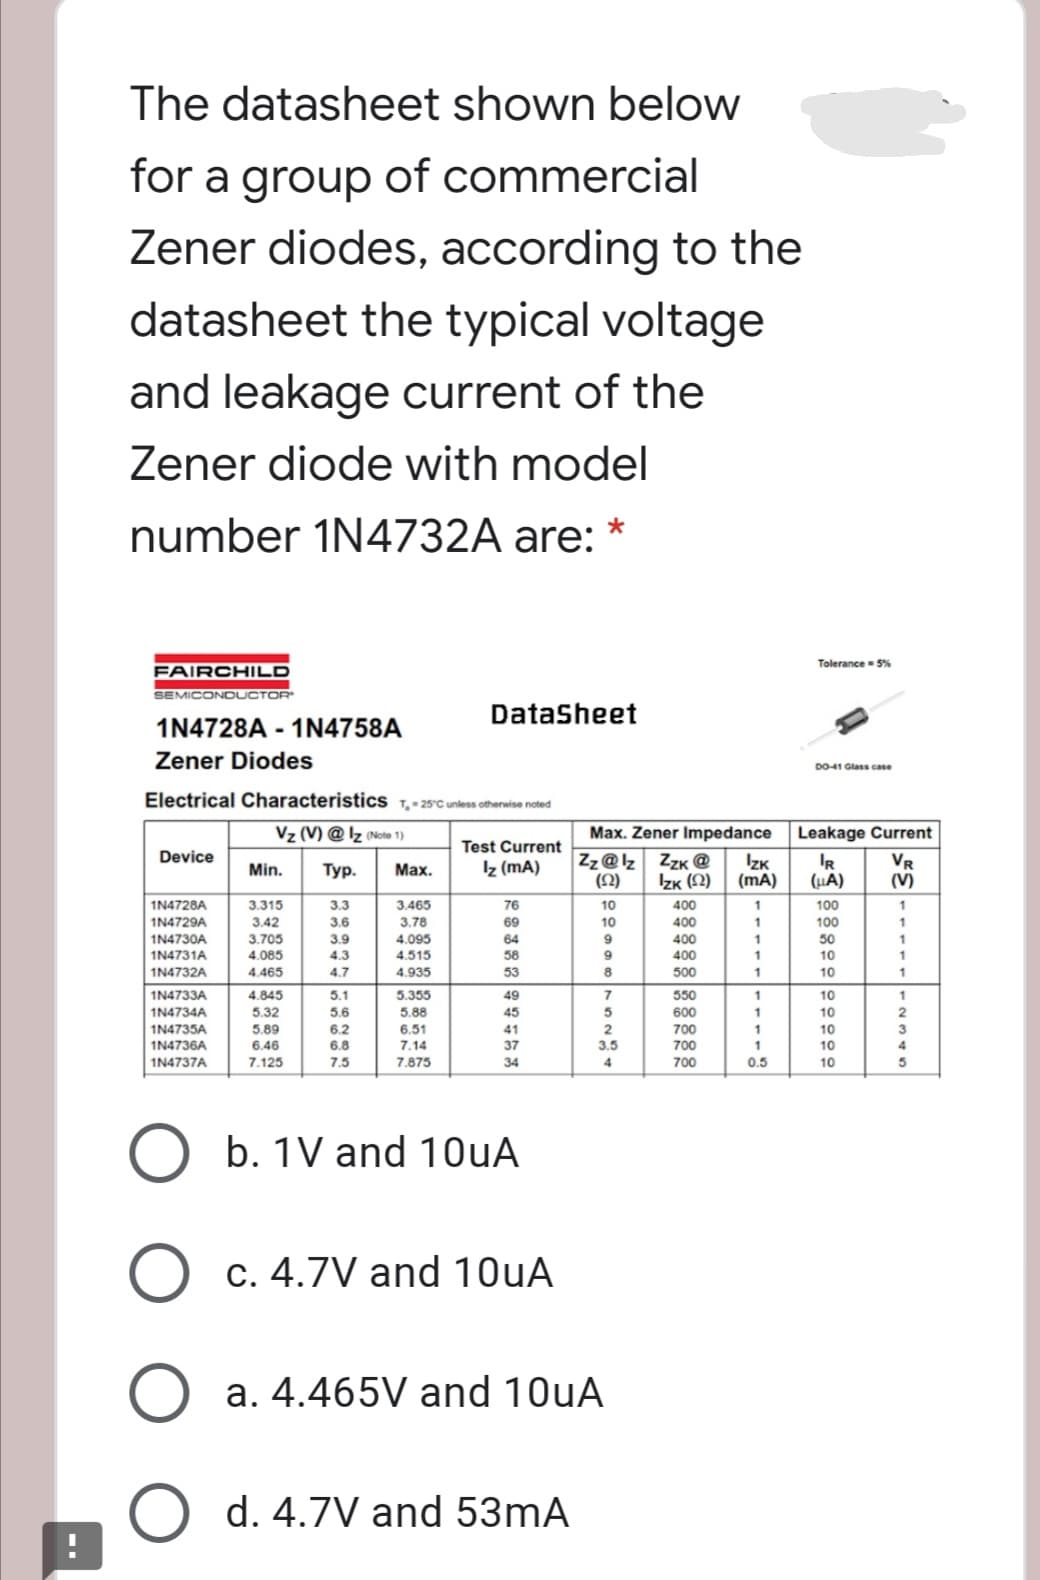 The datasheet shown below
for a group of commercial
Zener diodes, according to the
datasheet the typical voltage
and leakage current of the
Zener diode with model
number 1N4732A are: *
Tolerance- S%
FAIRCHILD
SEMICONDUCTOR
Datasheet
1N4728A - 1N4758A
Zener Diodes
D0041 Glass case
Electrical Characteristics 1,-25°C untess otherwise noted
Vz (V) @ Iz (Note 1)
Max. Zener Impedance
Leakage Current
Test Current
Device
Zz@lz ZzK @
IZK
(mA)
IR
(HA)
VR
(V)
Min.
Тур.
Мах.
Iz (mA)
(오)
Izk (2)
3.315
3.42
1N4728A
3.3
3.465
76
10
400
1
100
1
1N4729A
3.6
3,78
69
10
400
100
1N4730A
3.705
4.085
3.9
4.095
64
9
400
50
1N4731A
4.3
4.515
58
400
10
1N4732A
4.465
4.7
4.935
53
500
1
10
1
1N4733A
4.845
5.1
5.355
49
550
10
1
1N4734A
5.32
5.6
5.88
45
600
10
1N4735A
5.89
6.2
6.51
41
2
700
1
10
3
1N4736A
6,46
6.8
7.14
37
3.5
700
1
10
1N4737A
7.125
7.5
7.875
34
4
700
0.5
10
b. 1V and 10uA
O c. 4.7V and 10uA
a. 4.465V and 10UA
O d. 4.7V and 53mA
